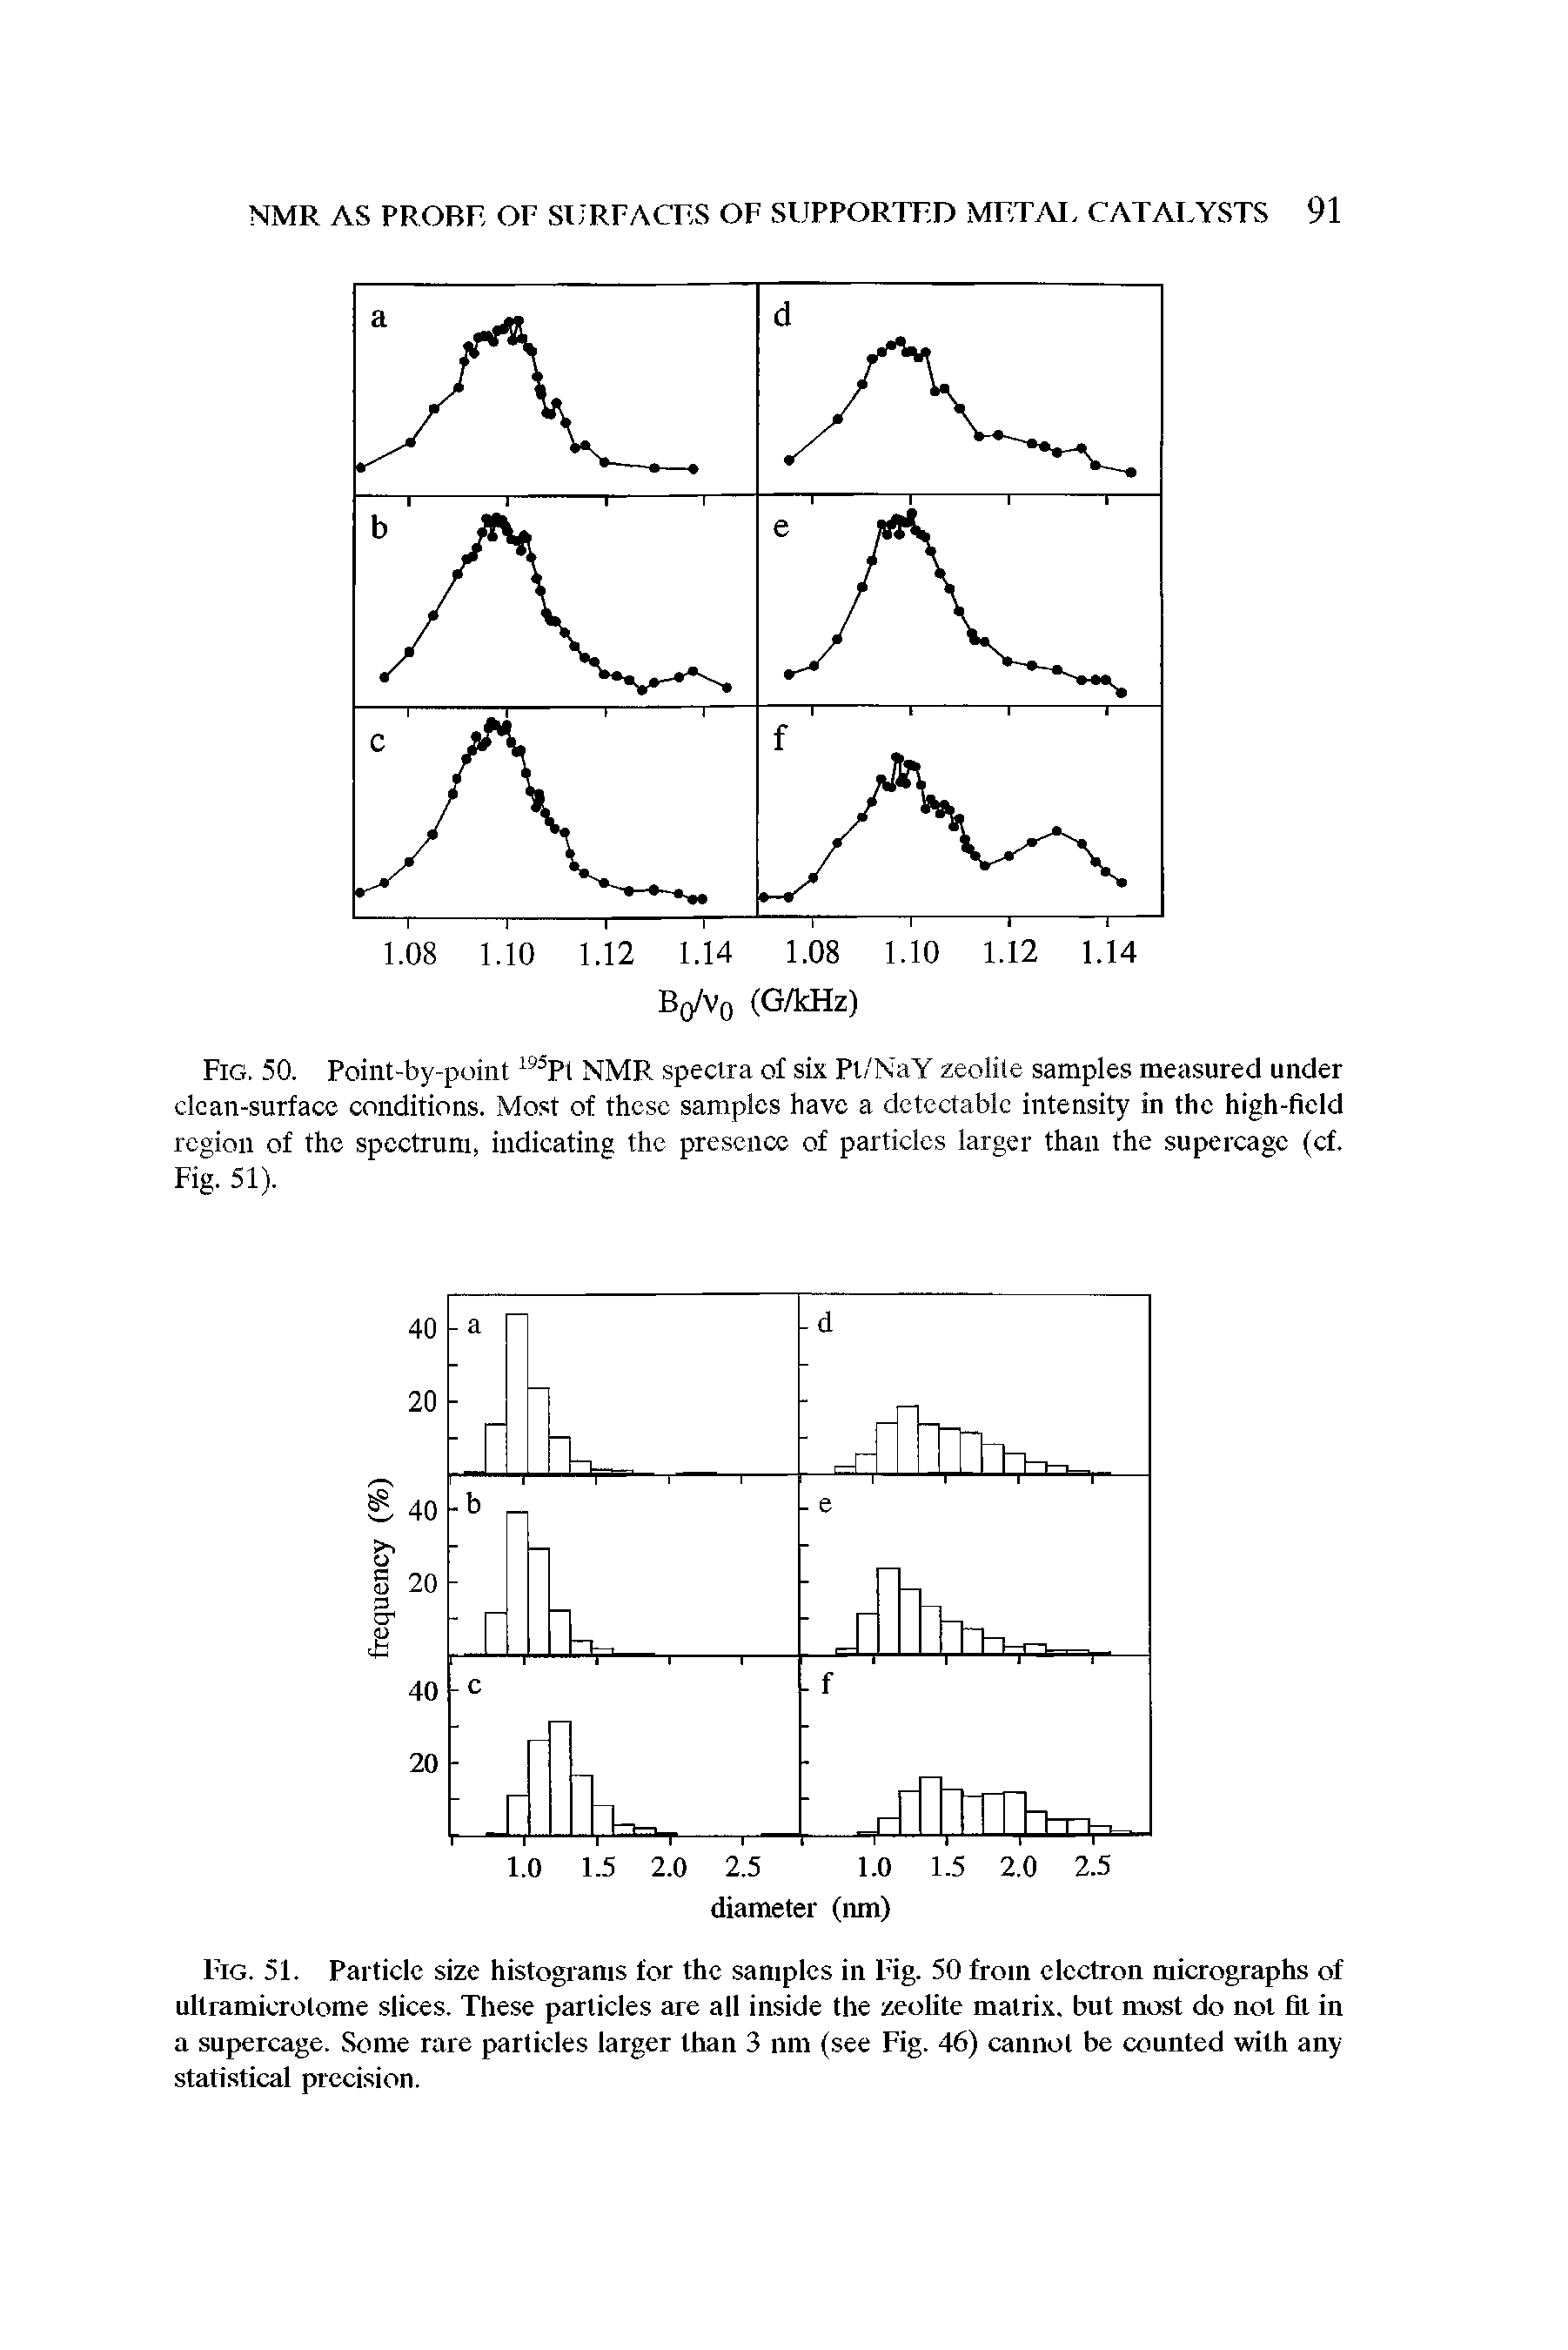 Fig. 51. Particle size histograms for the samples in Fig. 50 from electron micrographs of ultramicrotome slices. These particles are all inside the zeolite matrix, but most do not til in a supercage. Some rare particles larger than 3 nm (see Fig. 46) cannot be counted with any statistical precision.